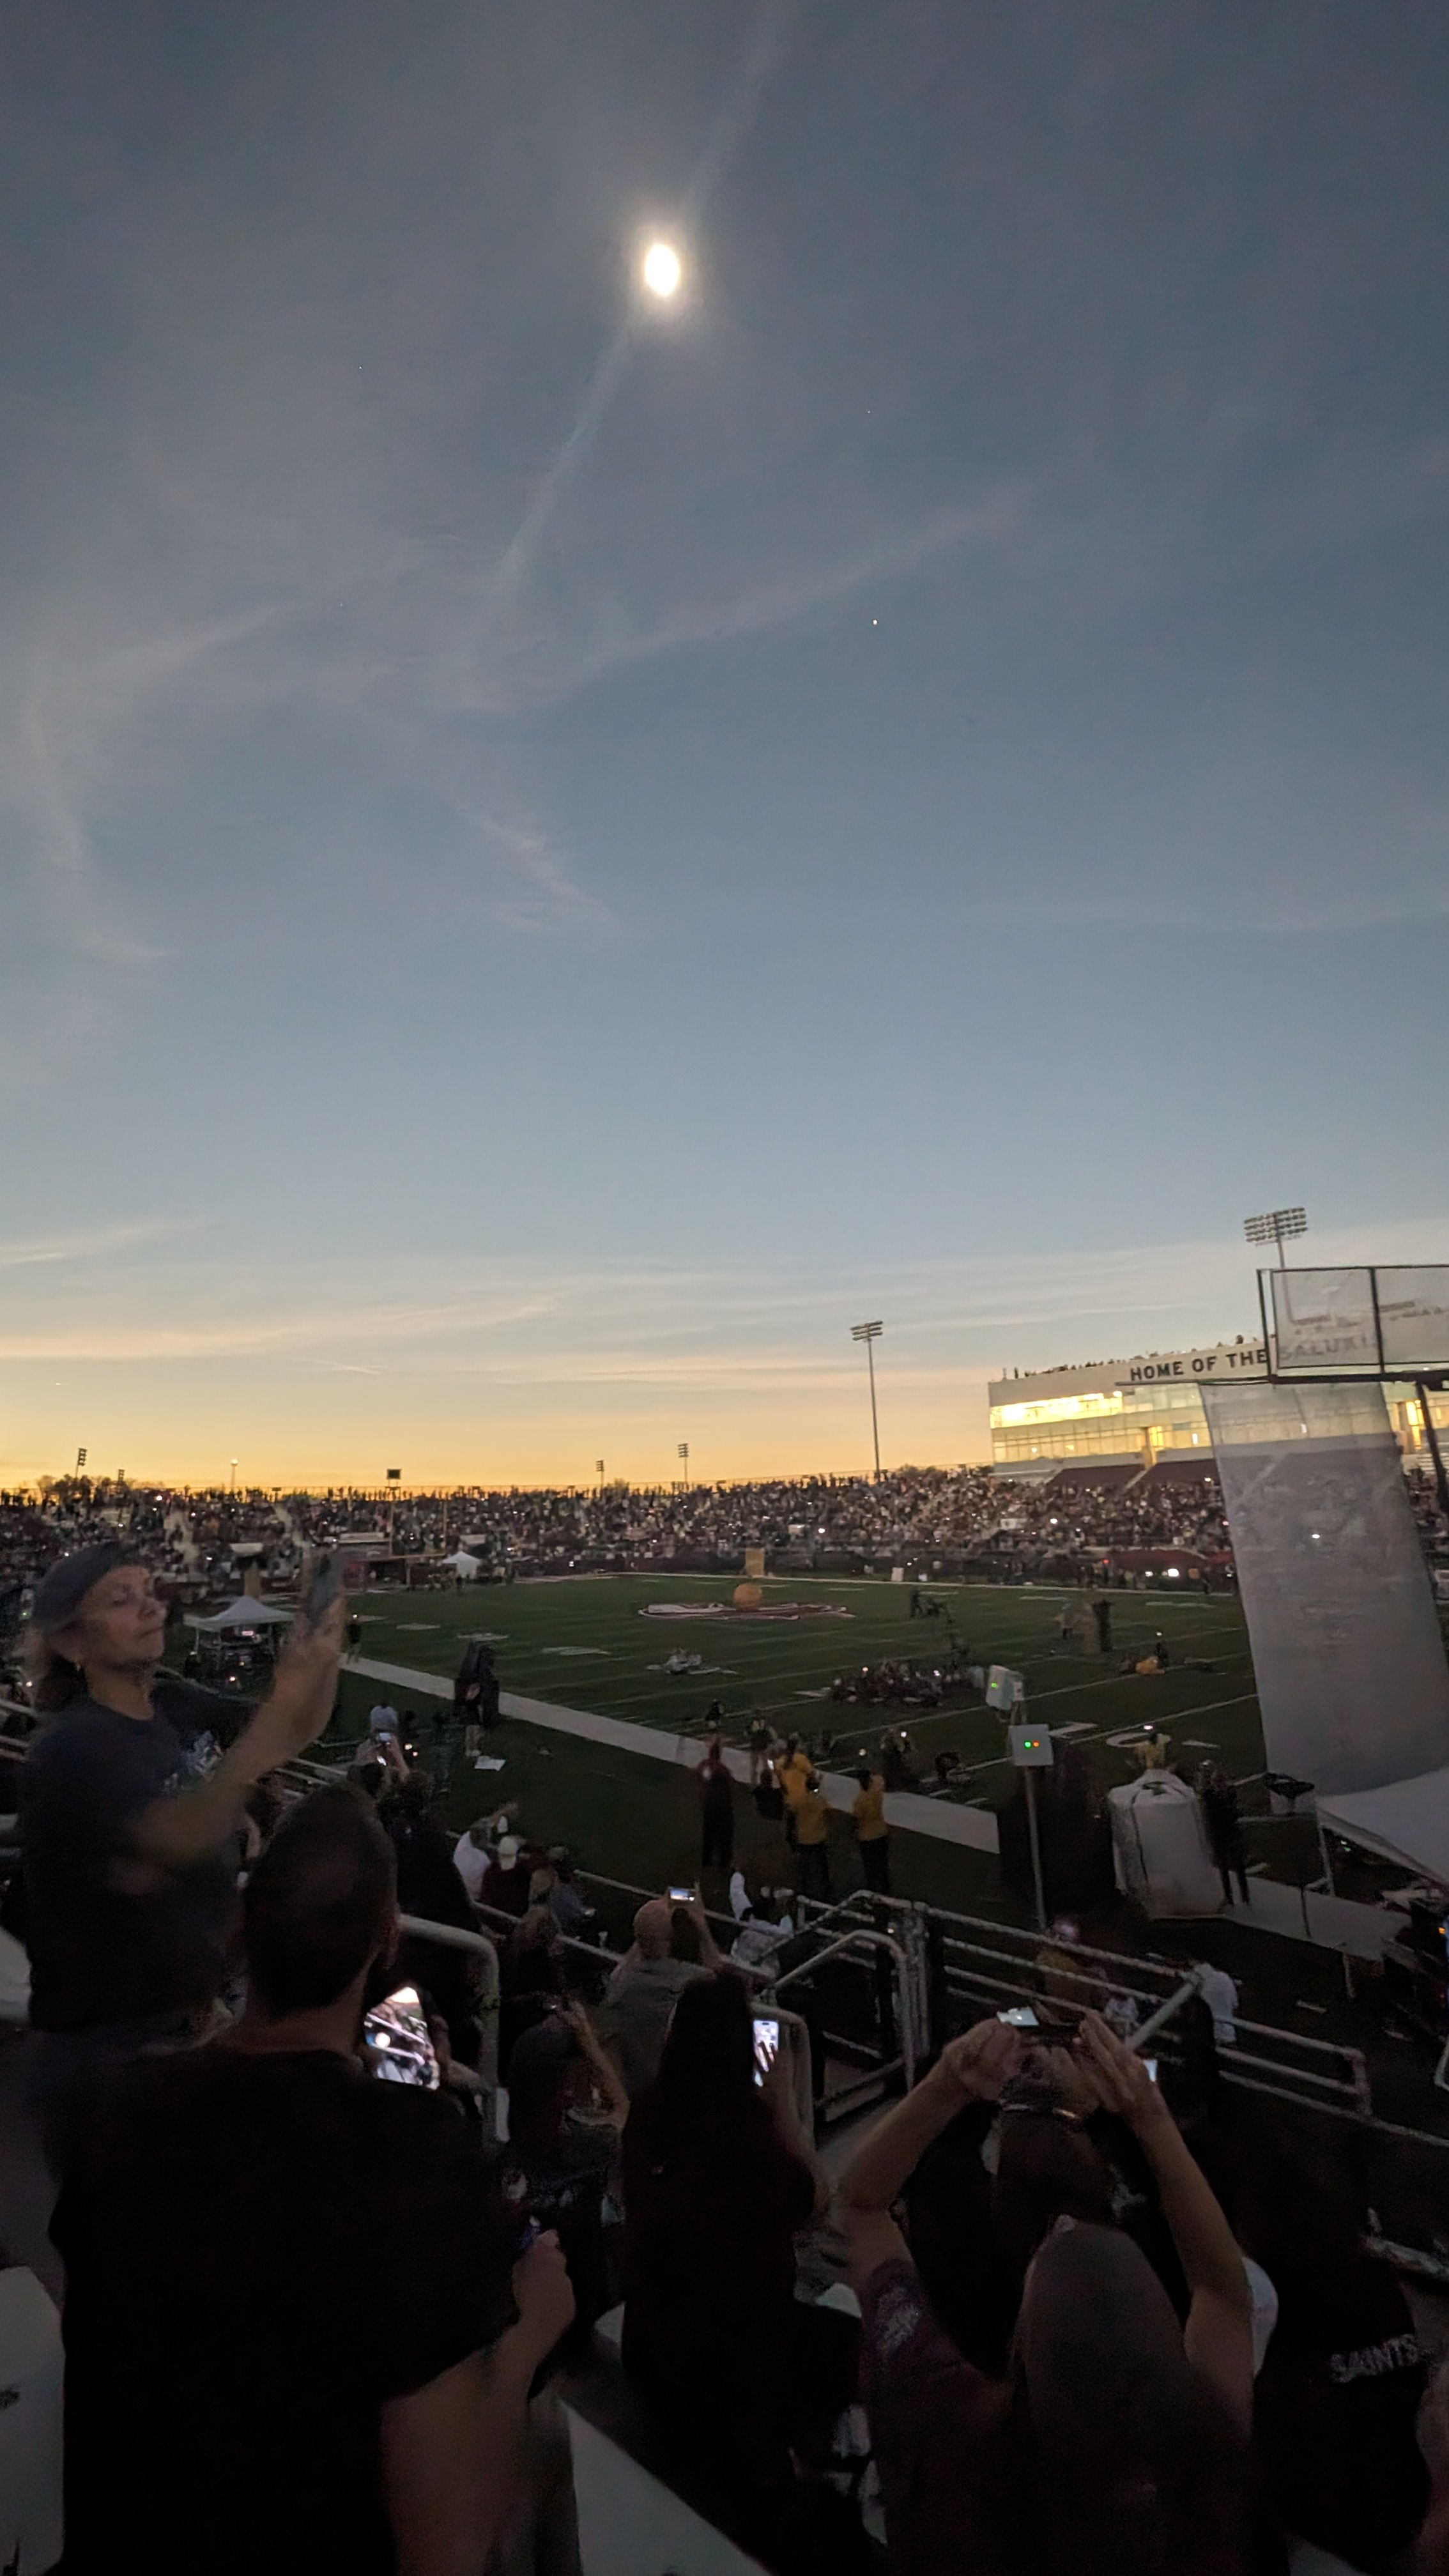 Eclipse watchers in a football stadium pointing their phone cameras skyward